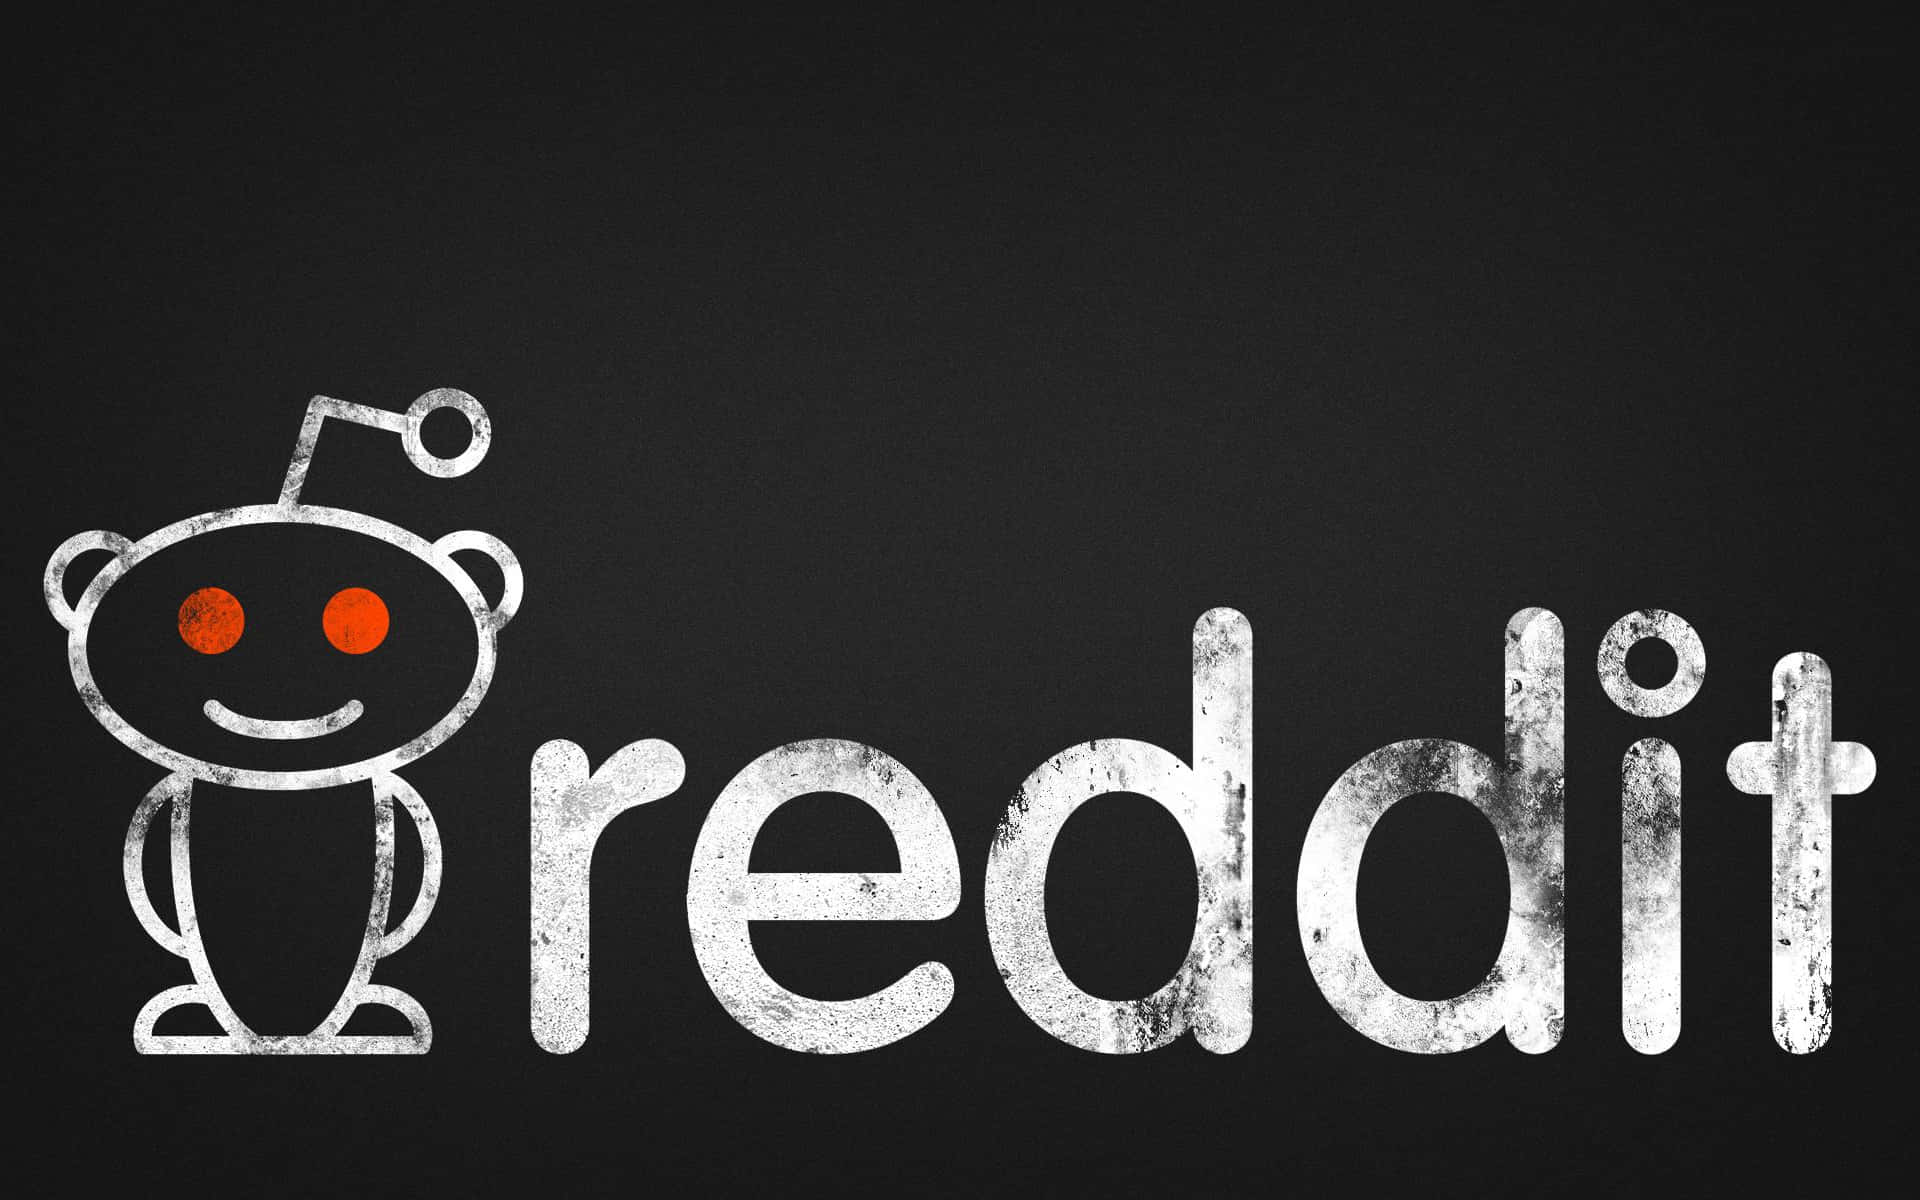 Keep up with current happenings with Reddit!